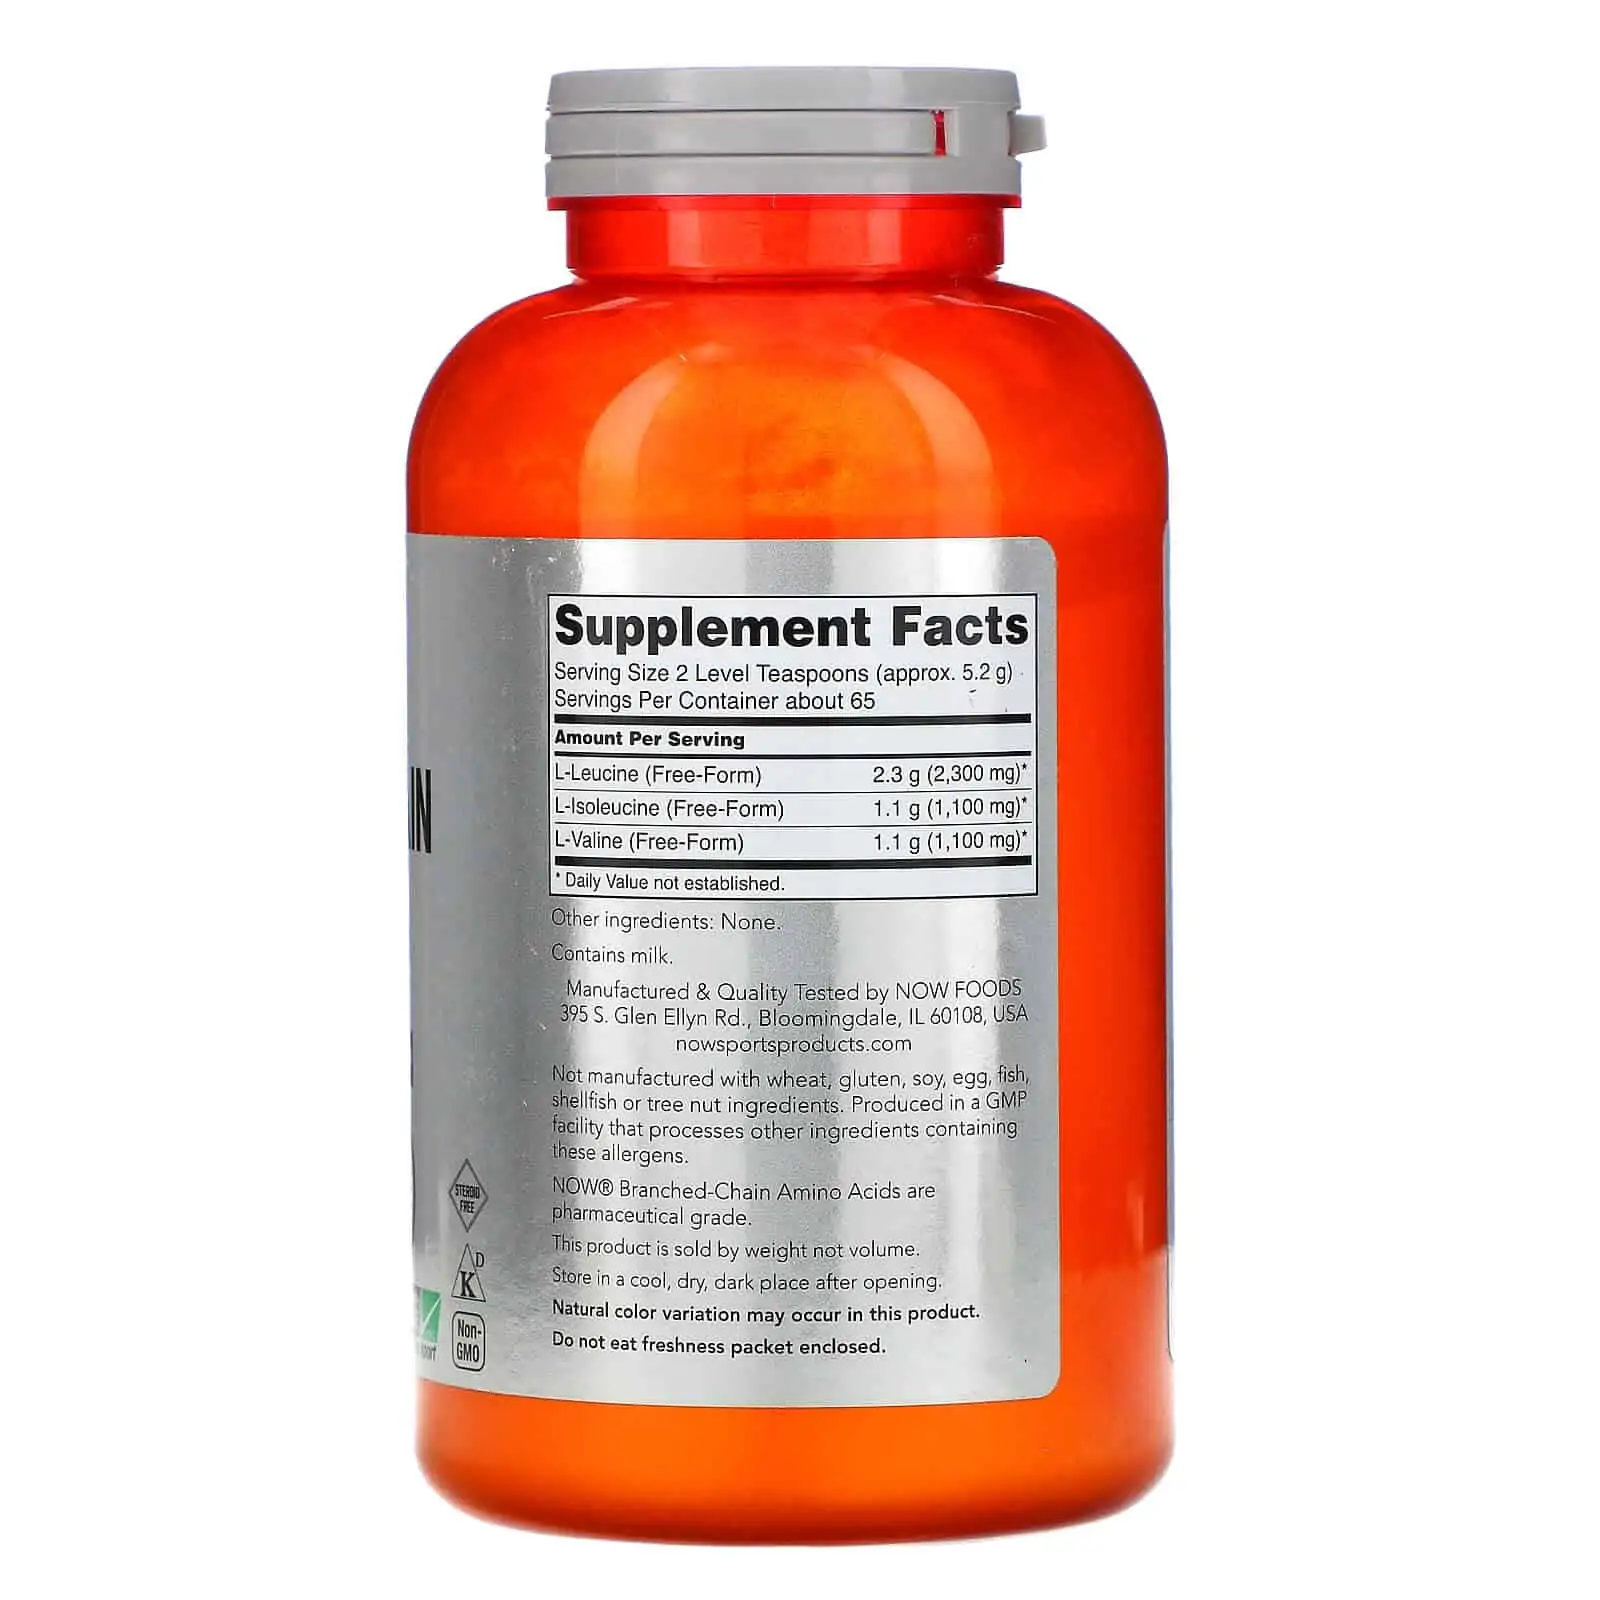 Now Sports Branched Chain Amino Acid Powder (Bcaa) 340G - low price, check  reviews and dosage